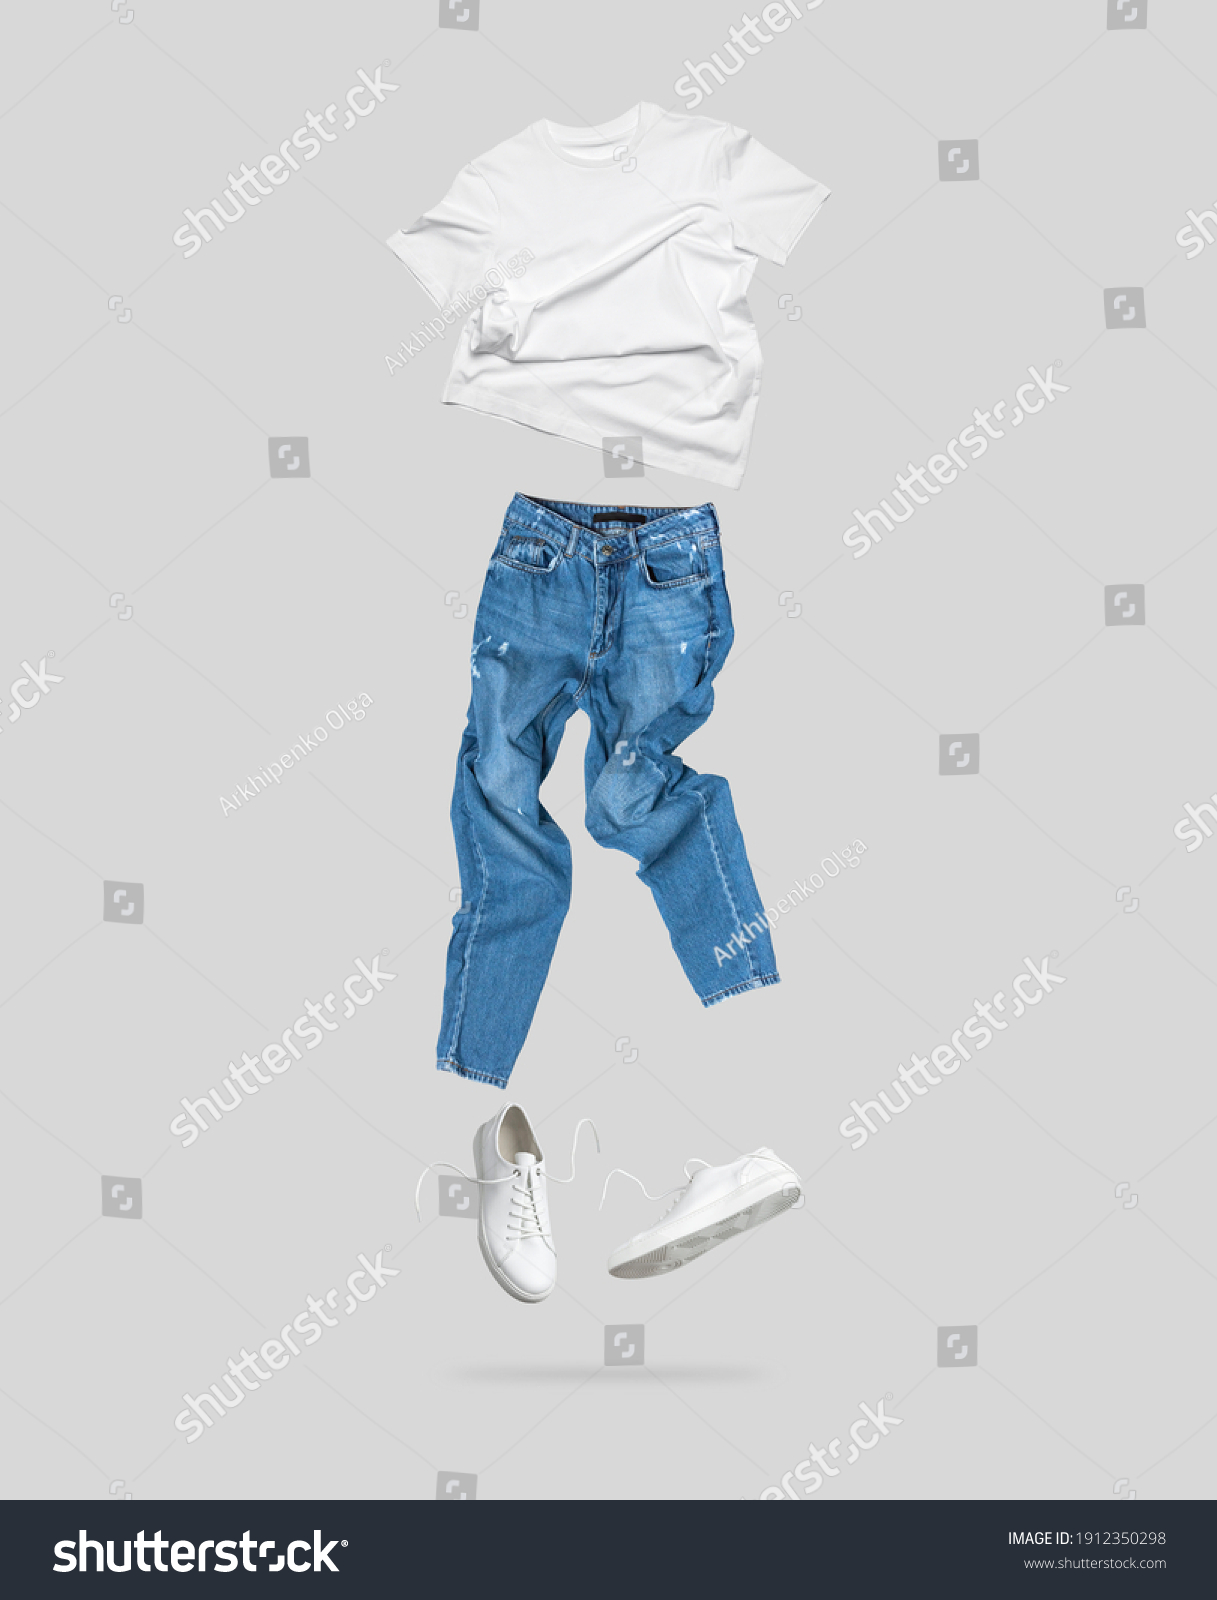 White flying cotton T-shirt, blue jeans, white leather sneakers isolated on gray background. Clean white Unisex T-shirt. Branding clothes. Mock up for your design. Spring Summer Women's Clothing #1912350298